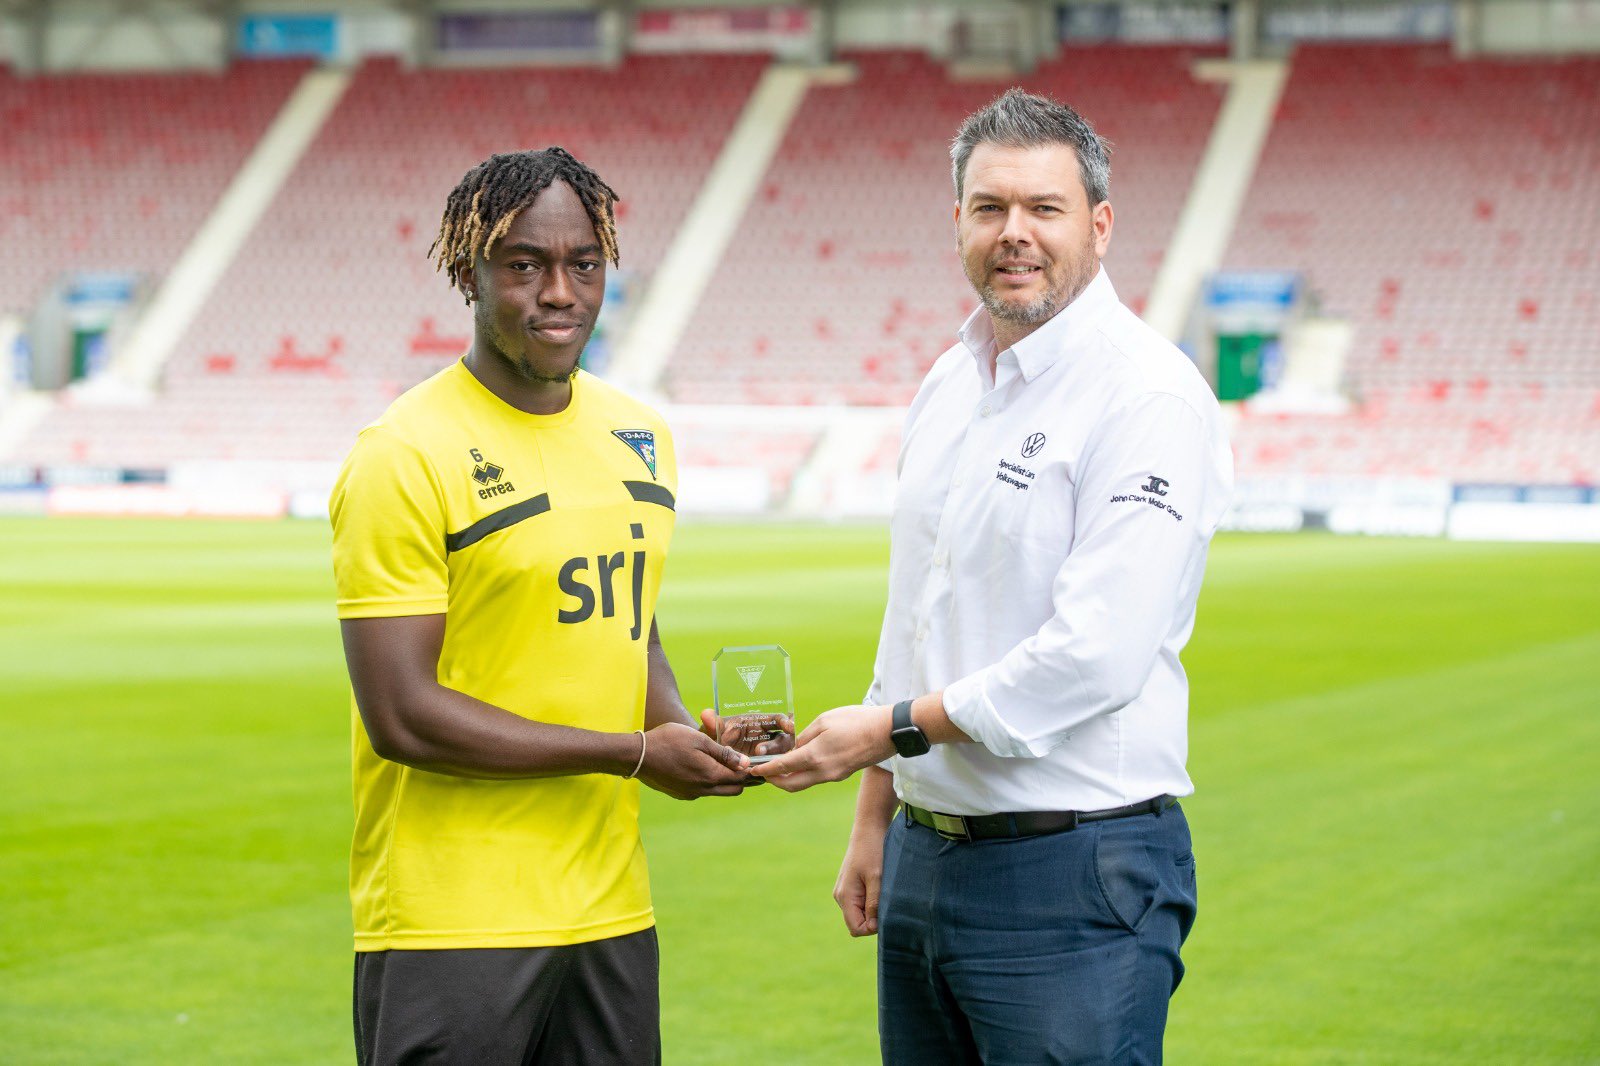 Ghana’s Ewan Otoo named Dunfermline Athletic Player of the Month for August